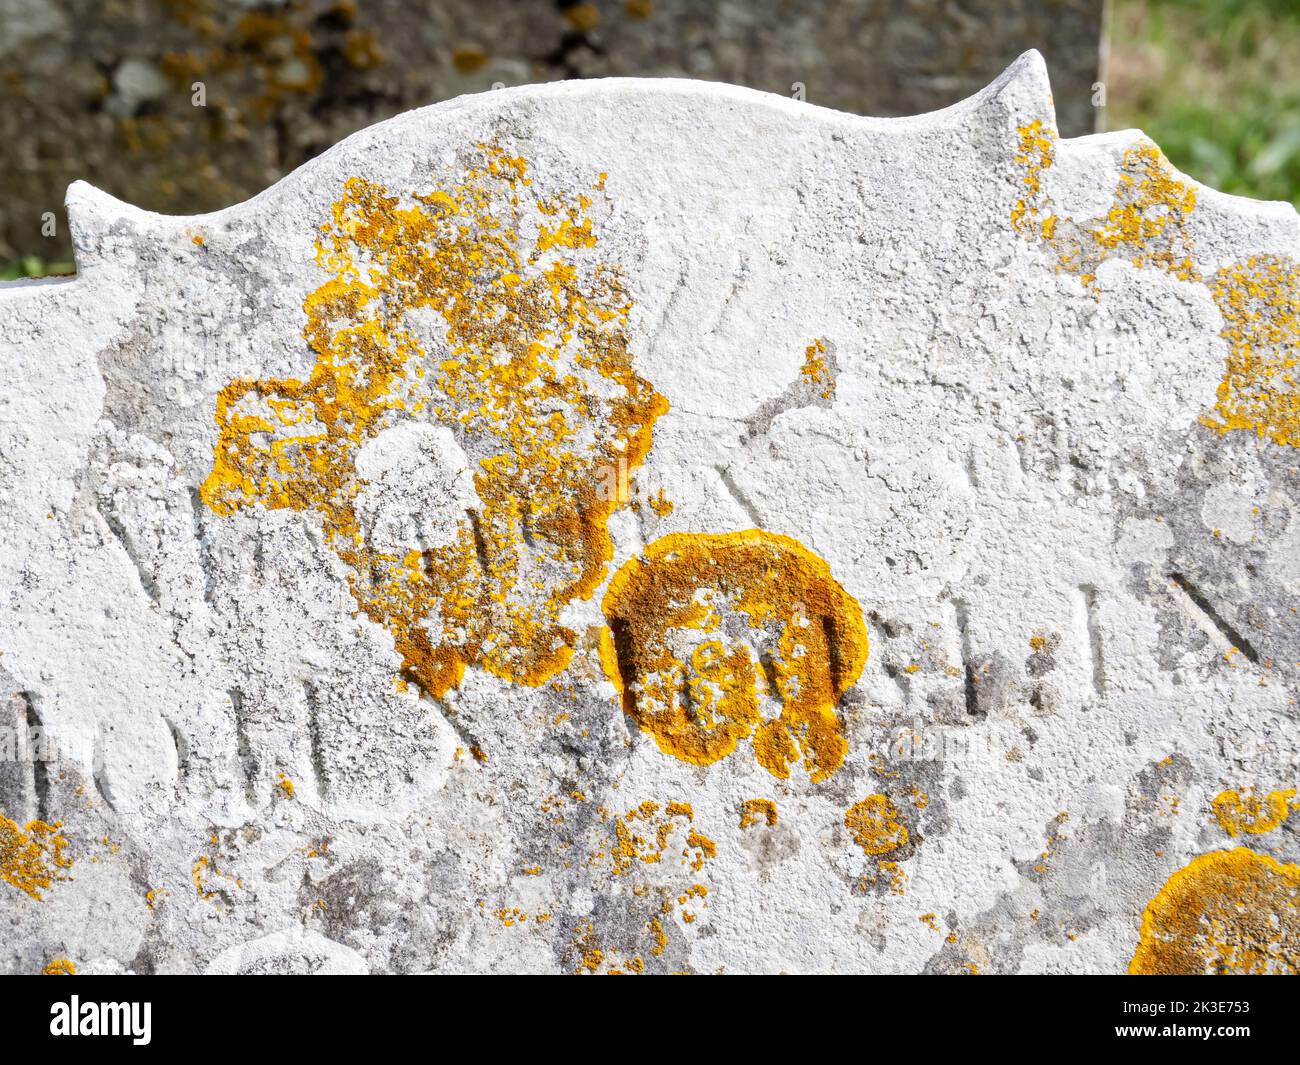 Lichen on a grave stone in Godshill cemetery on the Isle of White, UK. Stock Photo